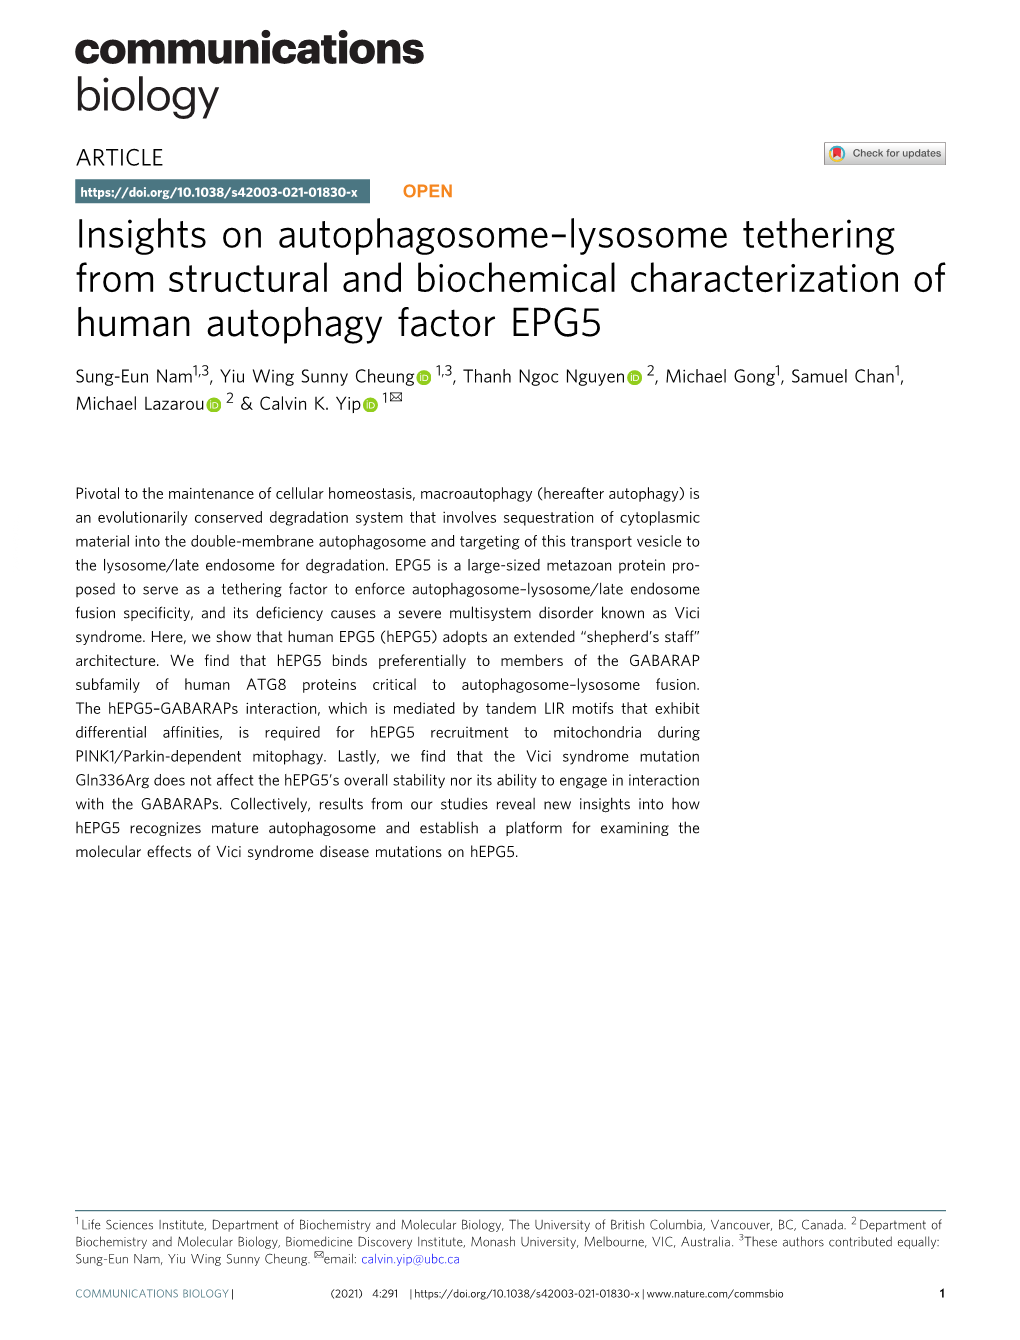 Lysosome Tethering from Structural and Biochemical Characterization of Human Autophagy Factor EPG5